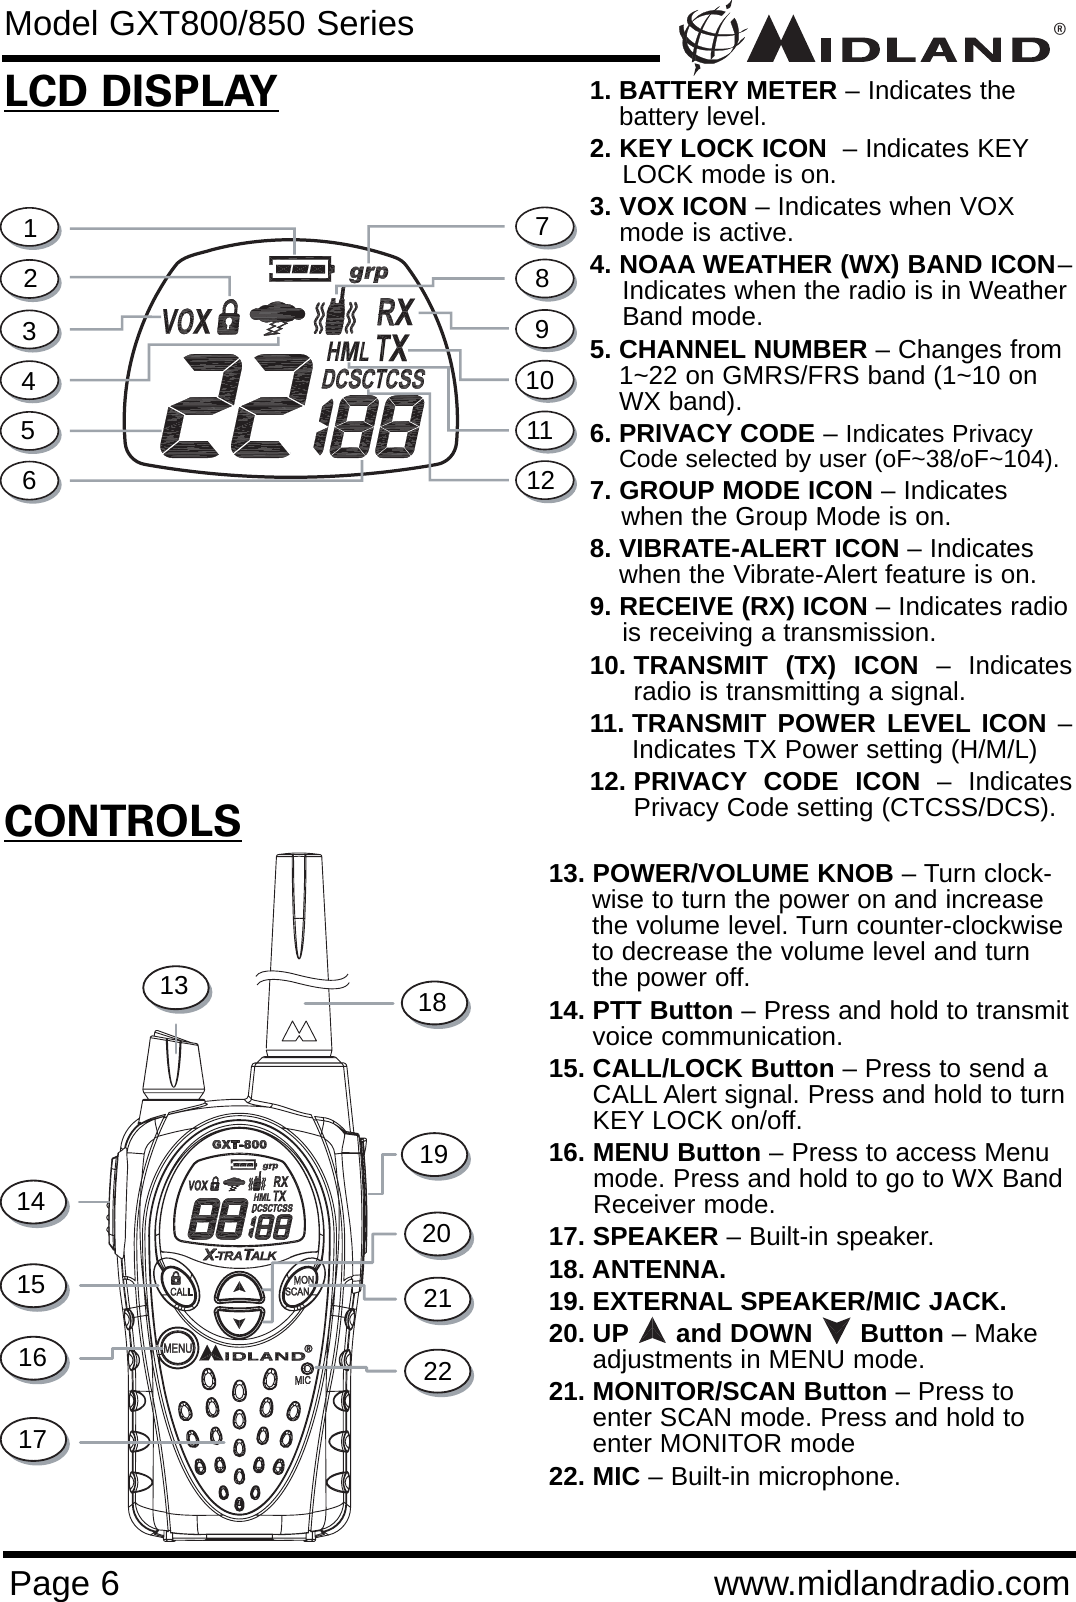 ®Page 6 www.midlandradio.comCONTROLSLCD DISPLAY1. BATTERY METER – Indicates thebattery level.2. KEY LOCK ICON  – Indicates KEYLOCK mode is on.3. VOX ICON – Indicates when VOX mode is active.4. NOAA WEATHER (WX) BAND ICON–Indicates when the radio is in WeatherBand mode.5. CHANNEL NUMBER – Changes from1~22 on GMRS/FRS band (1~10 onWX band).6. PRIVACY CODE – Indicates PrivacyCode selected by user (oF~38/oF~104).7. GROUP MODE ICON – Indicates when the Group Mode is on.  8. VIBRATE-ALERT ICON – Indicates when the Vibrate-Alert feature is on. 9. RECEIVE (RX) ICON – Indicates radiois receiving a transmission.10. TRANSMIT (TX) ICON – Indicatesradio is transmitting a signal.11. TRANSMIT POWER LEVEL ICON –Indicates TX Power setting (H/M/L)12. PRIVACY CODE ICON – IndicatesPrivacy Code setting (CTCSS/DCS).13. POWER/VOLUME KNOB – Turn clock-wise to turn the power on and increasethe volume level. Turn counter-clockwiseto decrease the volume level and turnthe power off.14. PTT Button – Press and hold to transmitvoice communication. 15. CALL/LOCK Button – Press to send aCALL Alert signal. Press and hold to turnKEY LOCK on/off.16. MENU Button – Press to access Menu mode. Press and hold to go to WX Band Receiver mode.17. SPEAKER – Built-in speaker.18. ANTENNA.19. EXTERNAL SPEAKER/MIC JACK.20. UP and DOWN      Button – Makeadjustments in MENU mode.21. MONITOR/SCAN Button – Press toenter SCAN mode. Press and hold toenter MONITOR mode22. MIC – Built-in microphone.1234567891013141516172221201918Model GXT800/850 Series1112